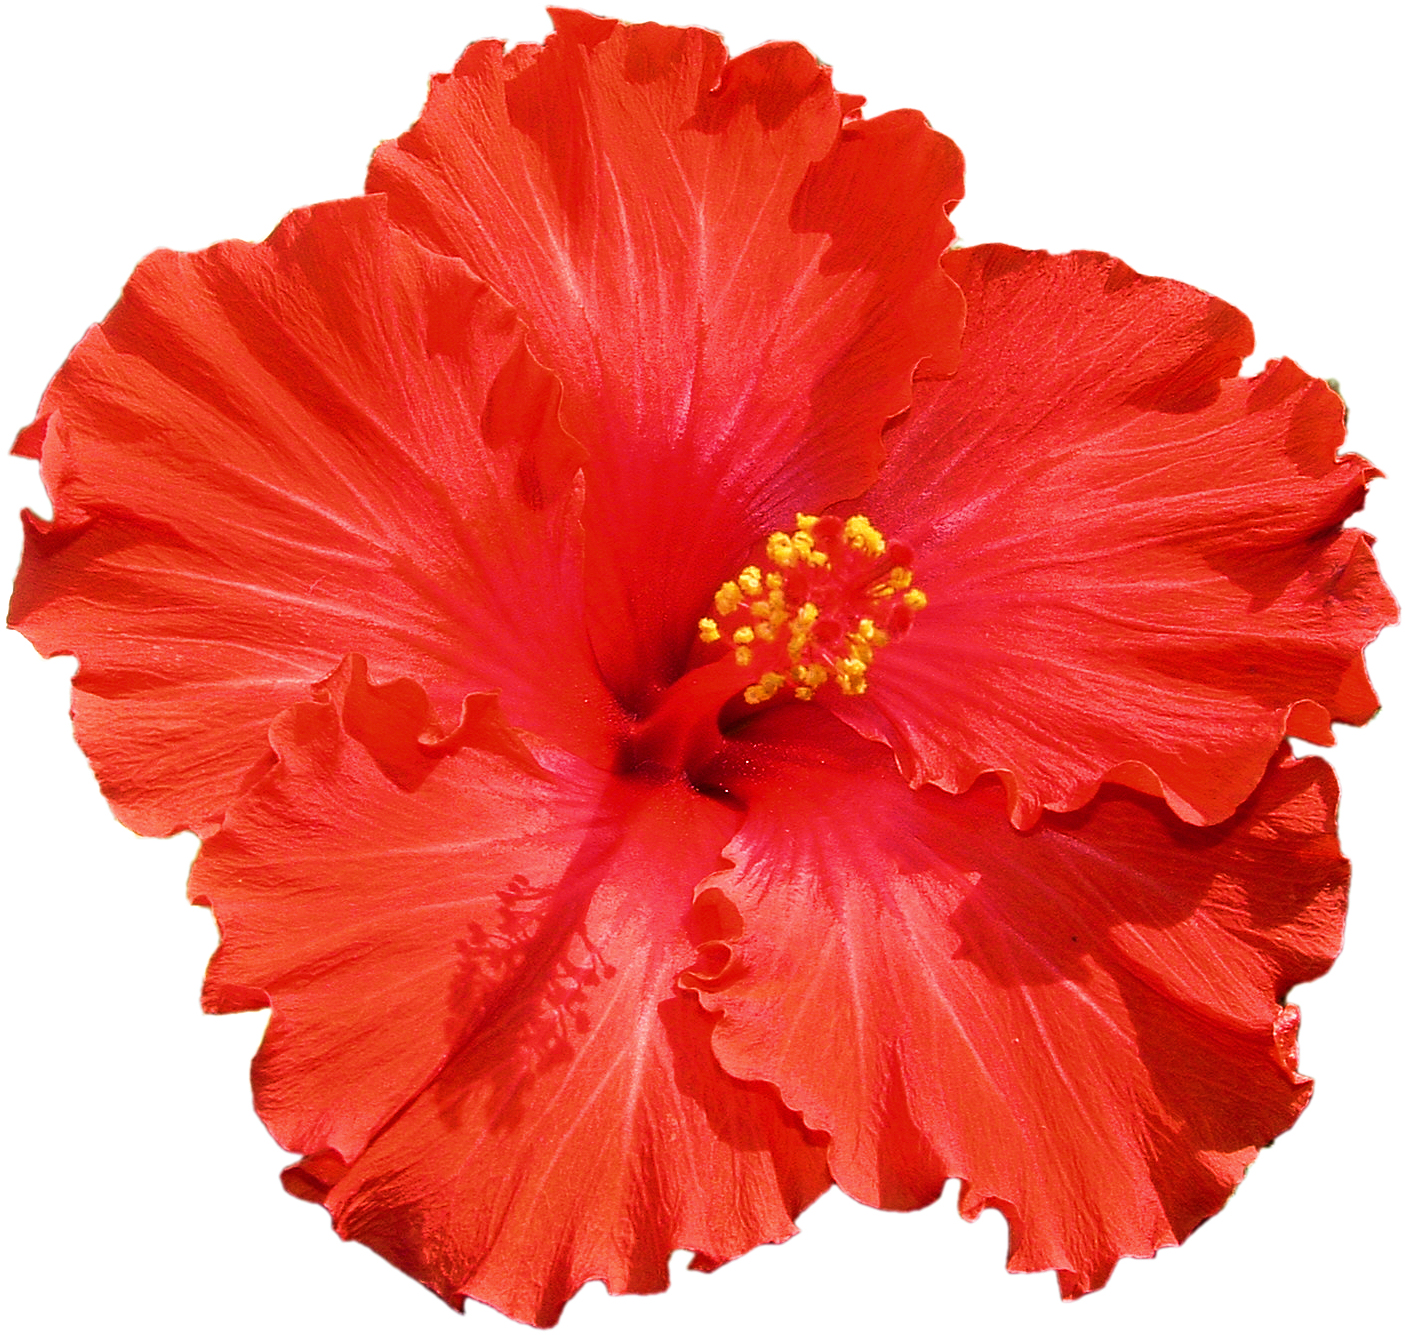 Hibiscus   Free Images At Clker Com   Vector Clip Art Online Royalty